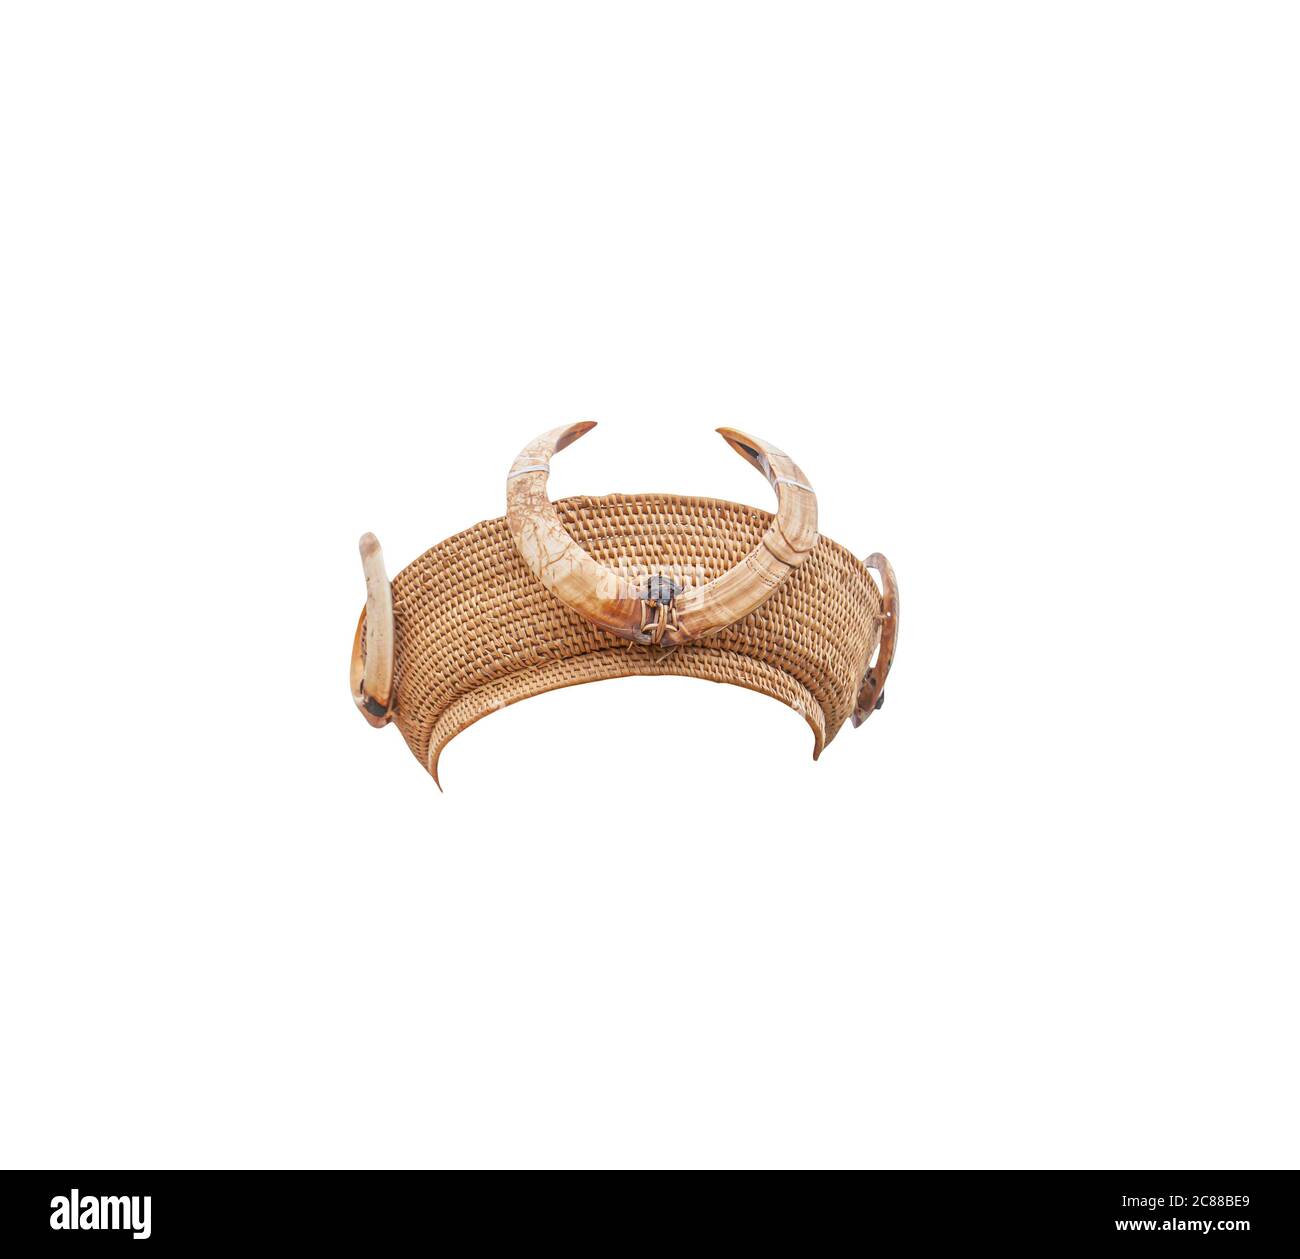 Kachin or Jingpo traditional rattan hat with tusks of a wild boar, isolated on white background with clipping path. Straight front view. Stock Photo